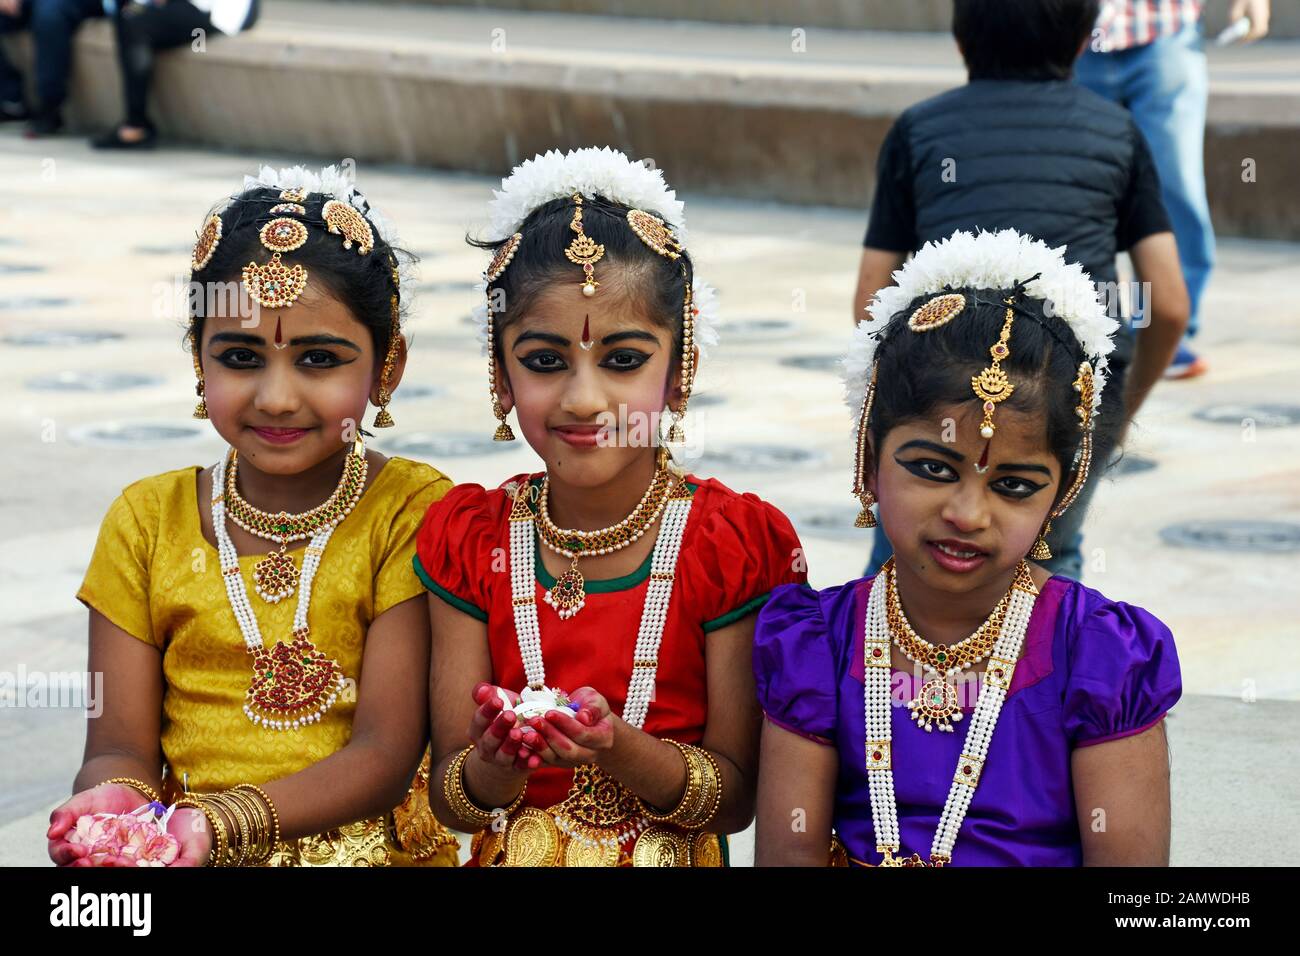 INDIAN CHILDREN IN CULTURAL COSTUMES Stock Photo